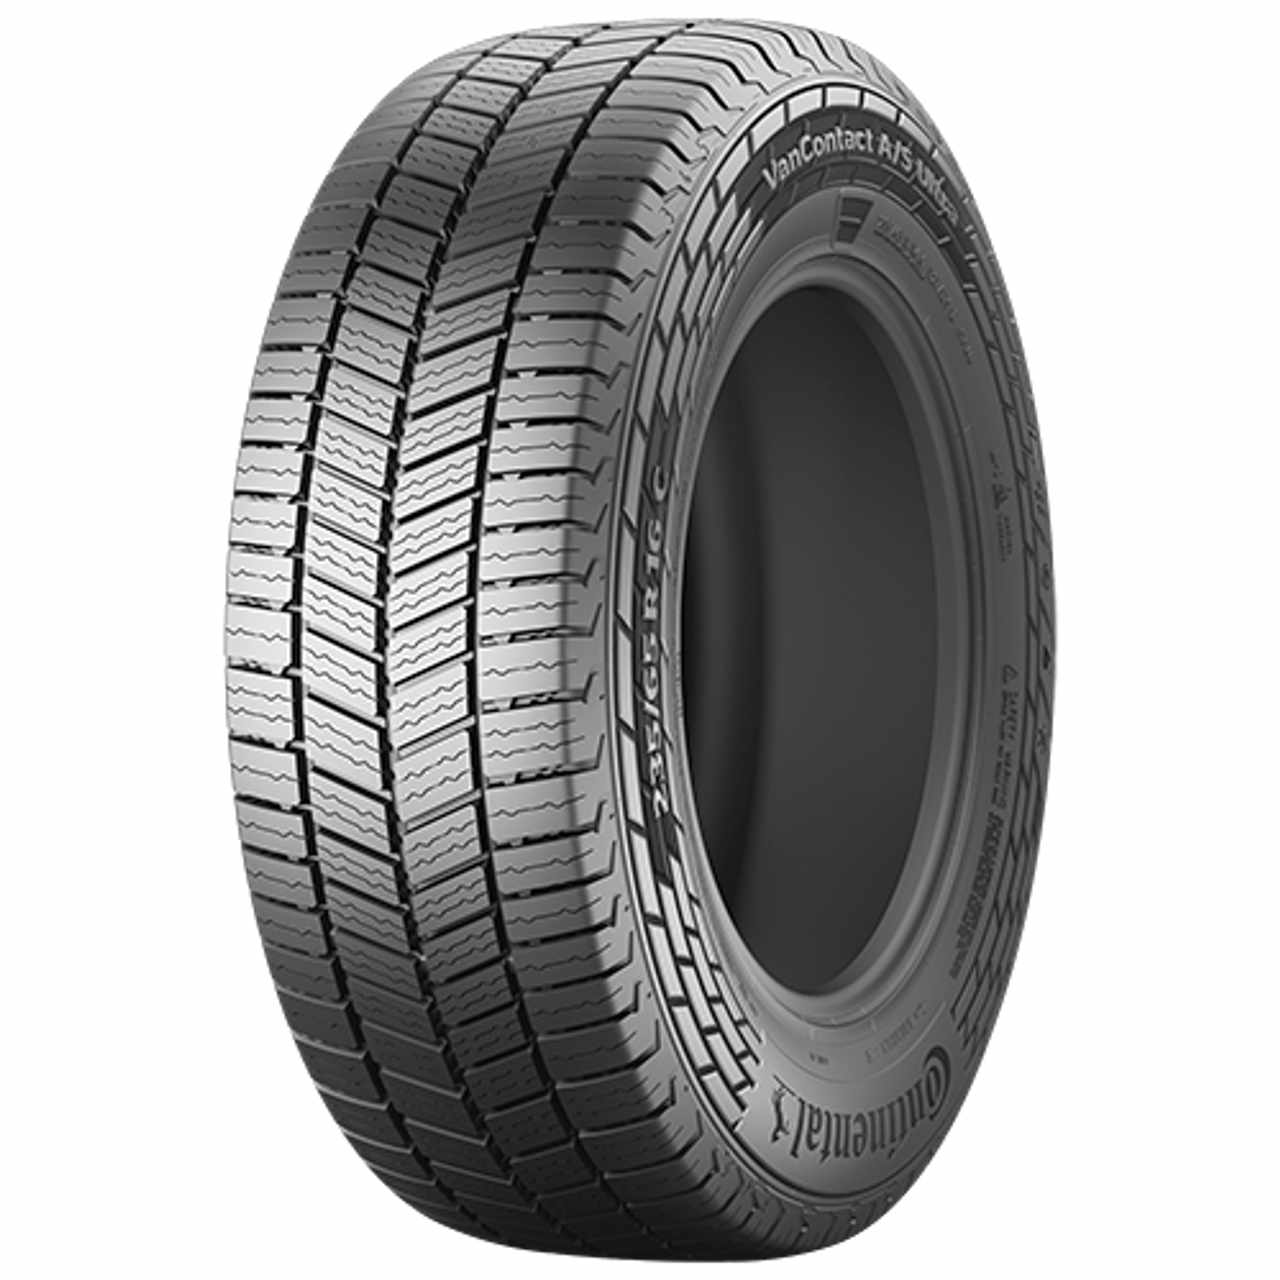 CONTINENTAL VANCONTACT A/S ULTRA 215/65ZR16C 109T BSW